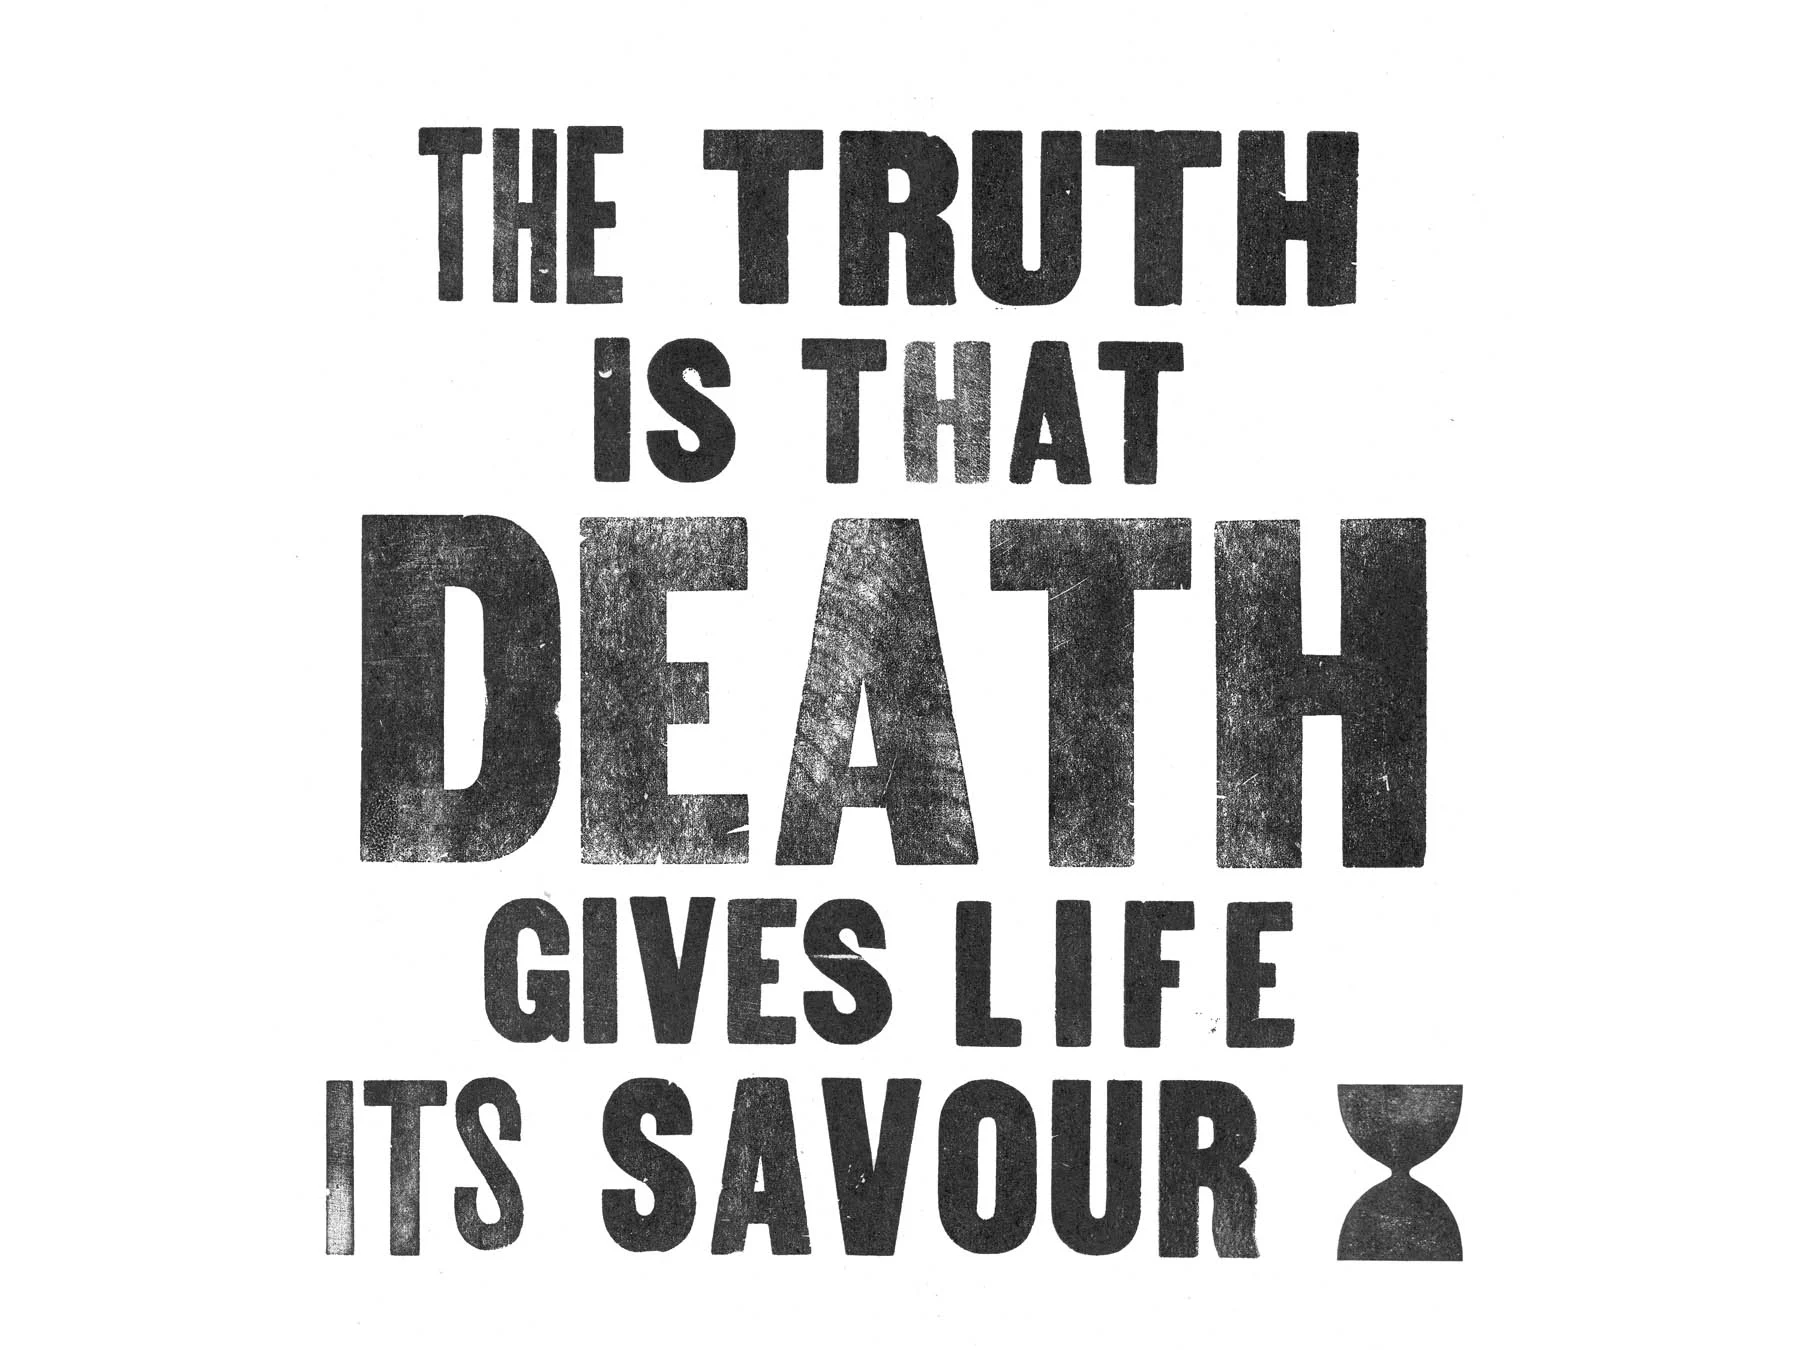 The truth is that death gives life its savour.